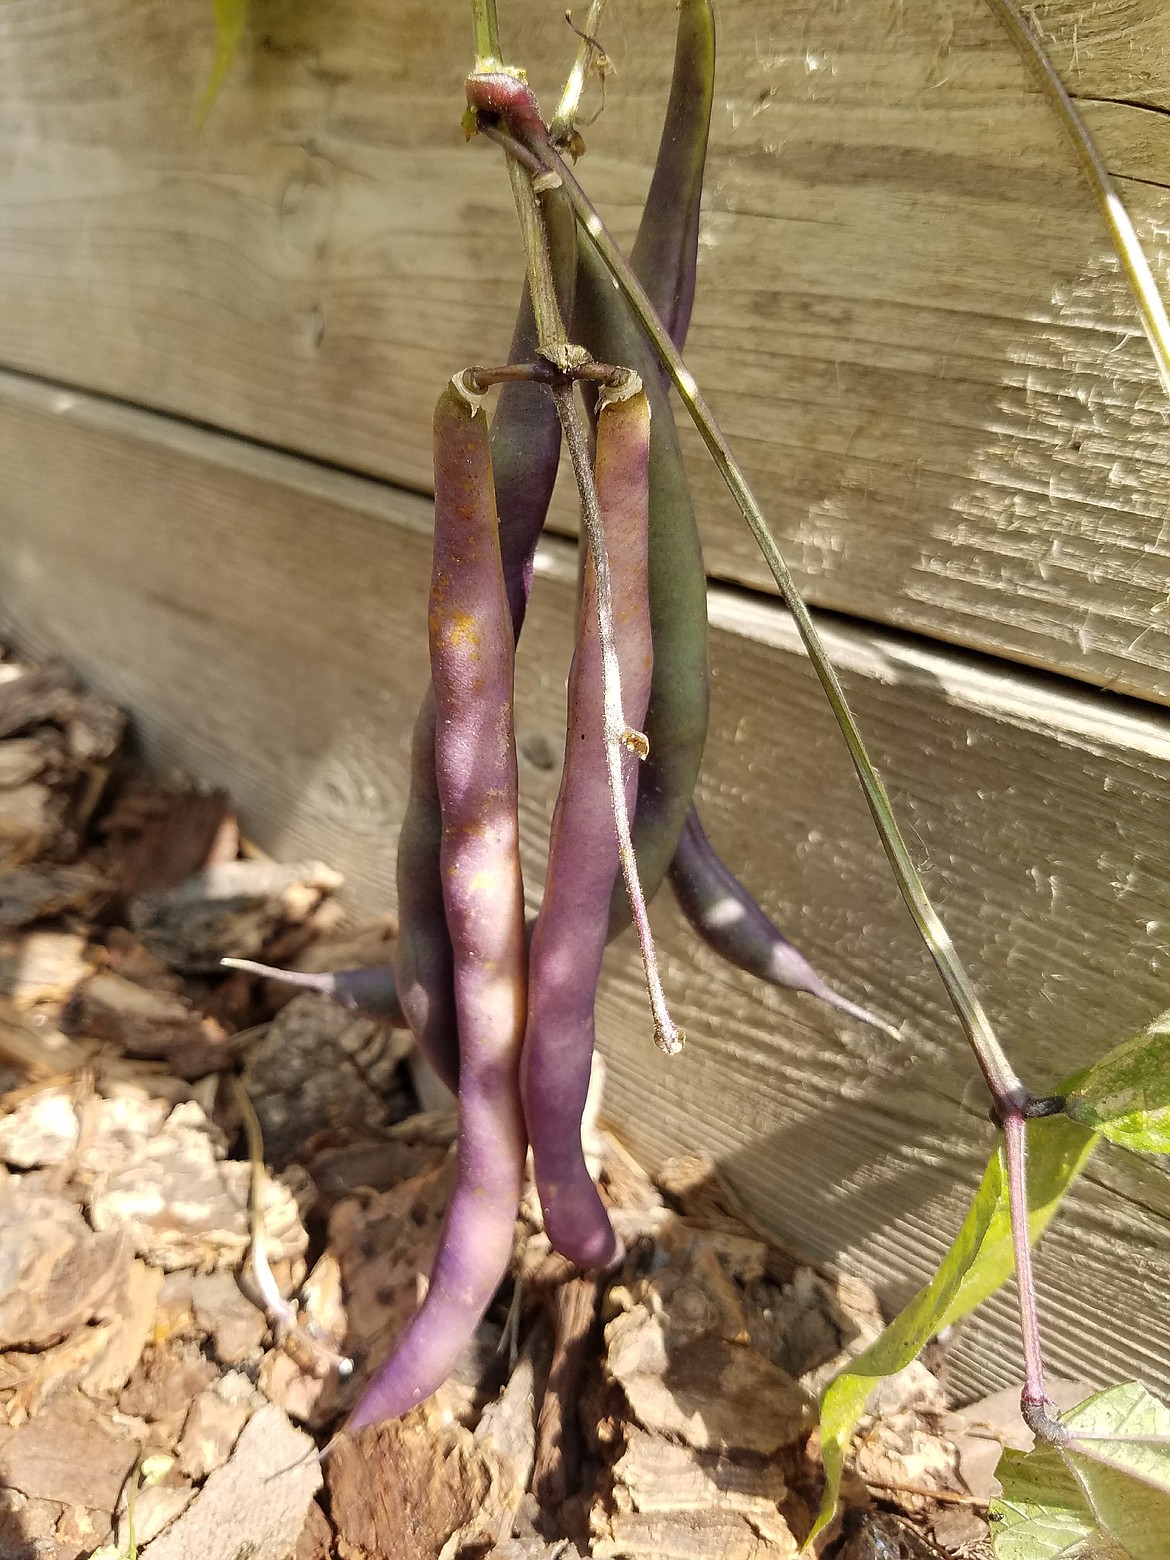 Beans can be left on the plant to dry completely or picked when “leathery” like these and hung to dry.